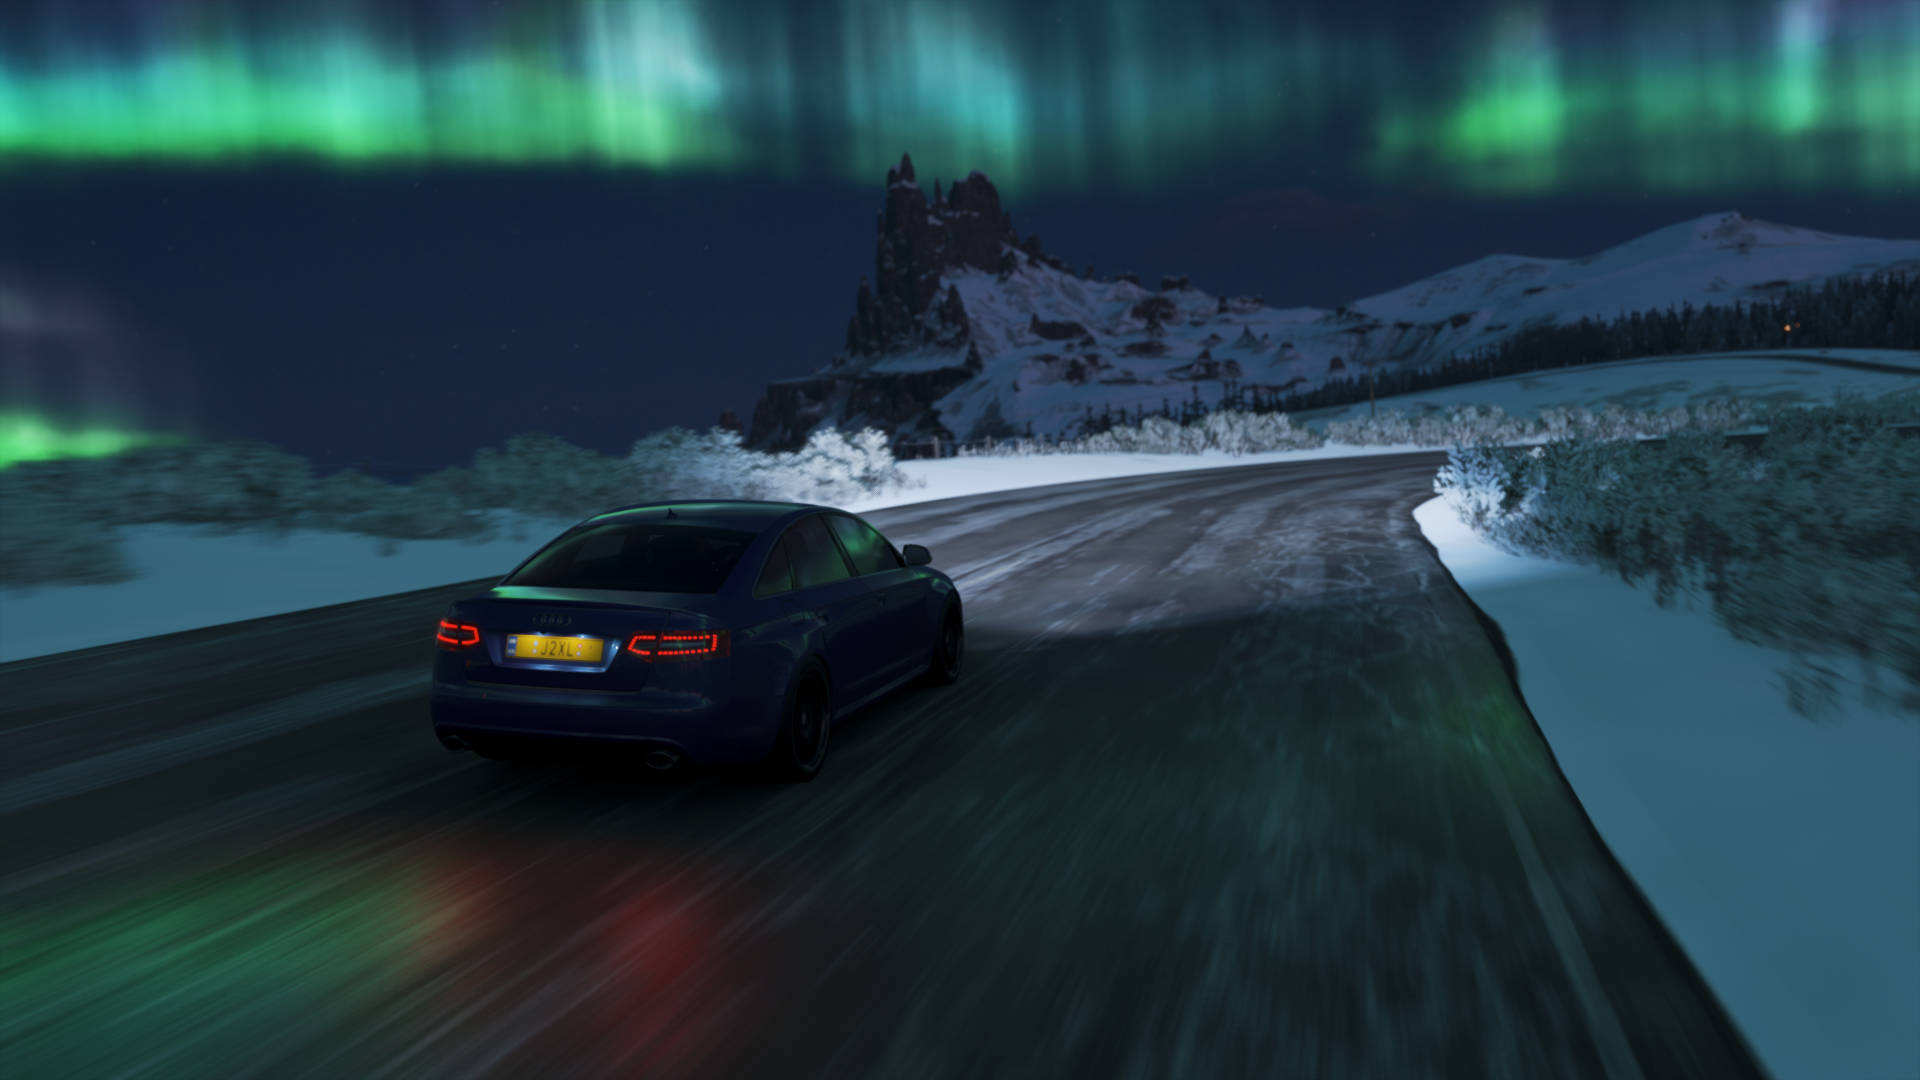 A Car Driving On A Snowy Road With The Aurora Lights On Wallpaper